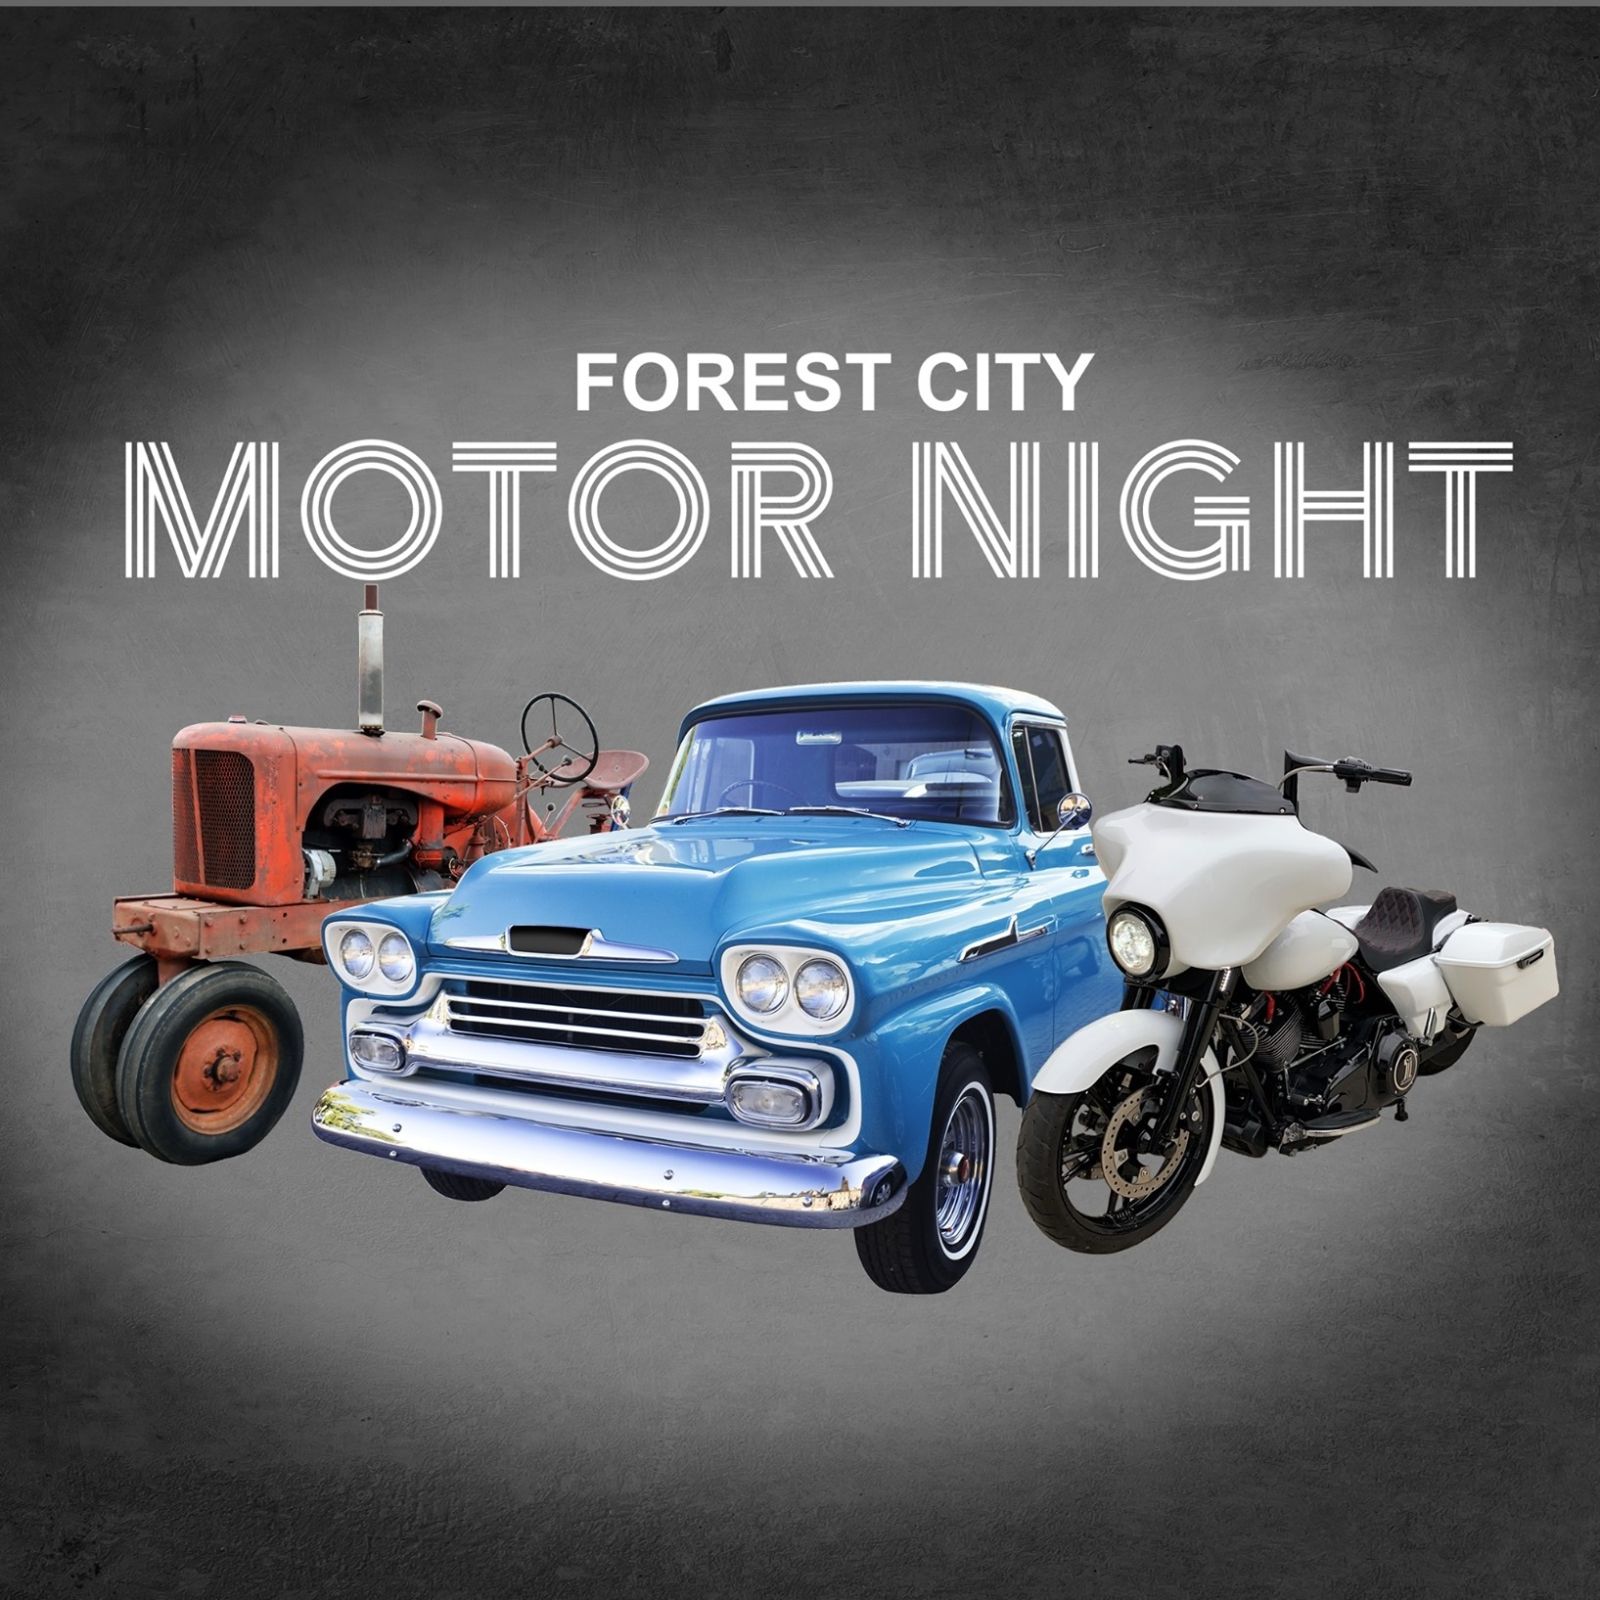 Event Promo Photo For Forest City Motor Night